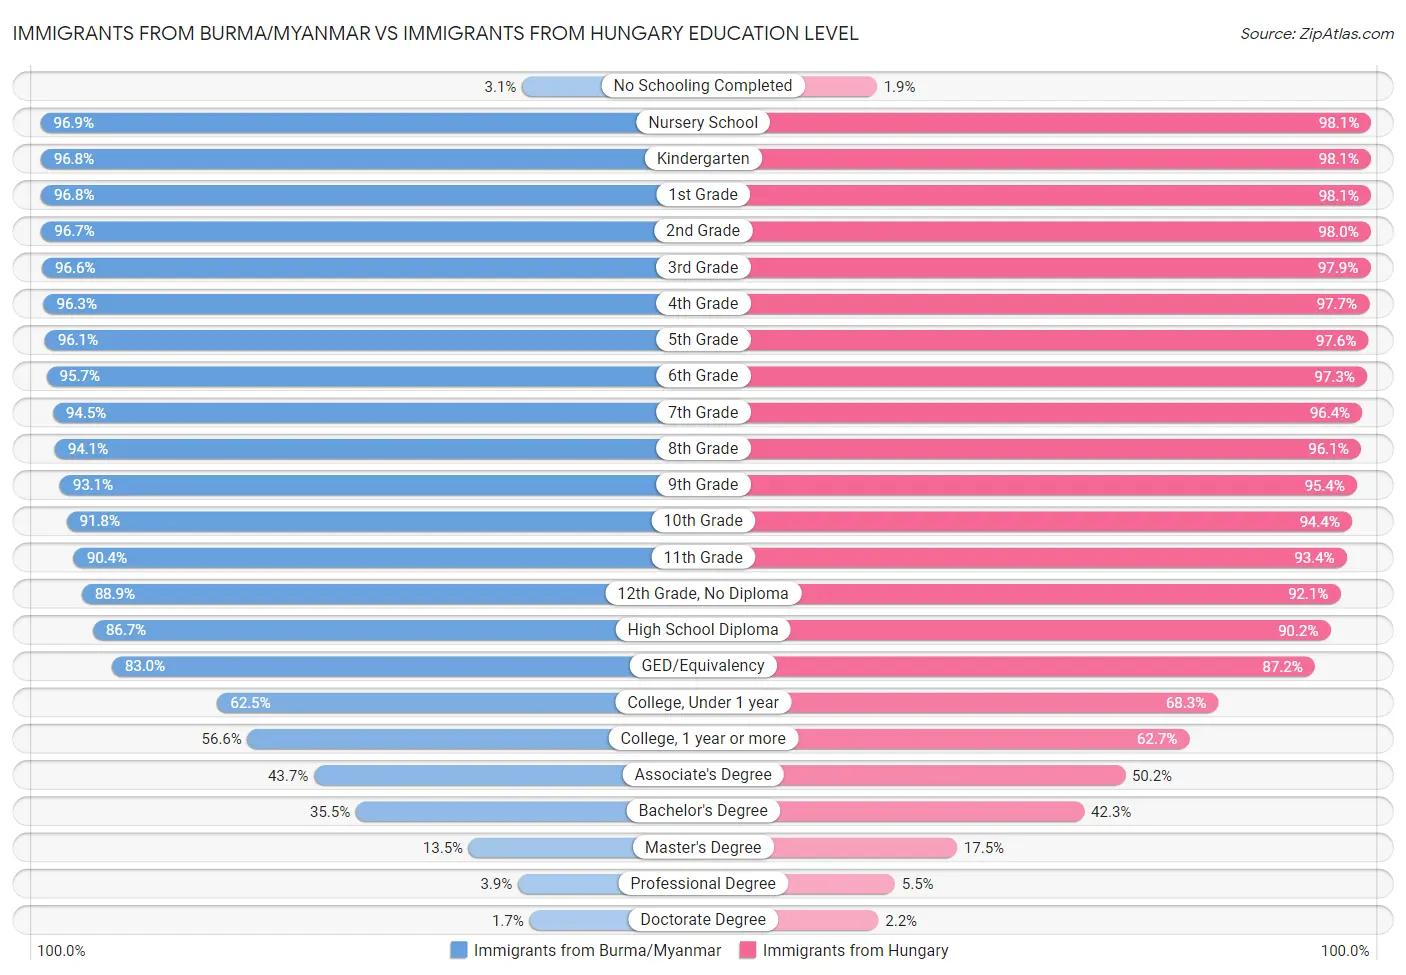 Immigrants from Burma/Myanmar vs Immigrants from Hungary Education Level